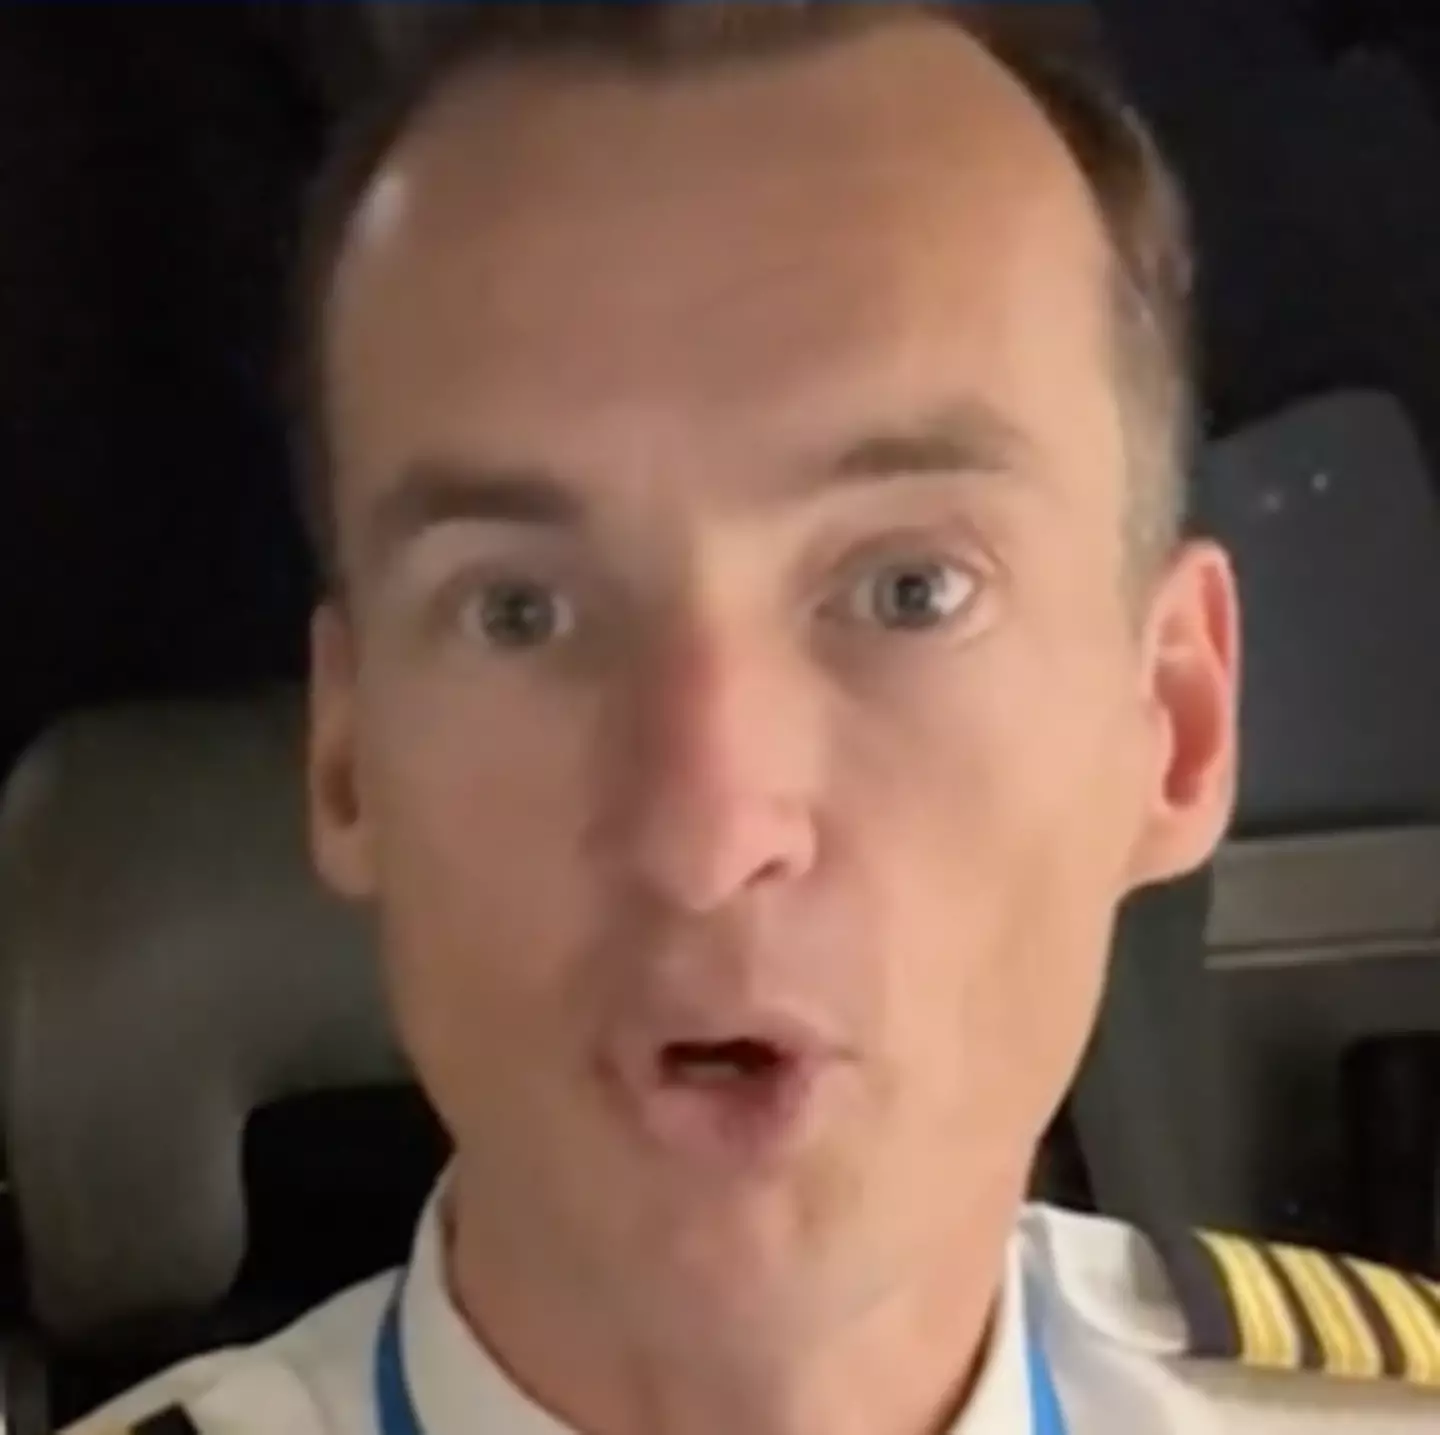 Pilot explains why there's no need to panic during turbulence and leaves people feeling 'reassured'